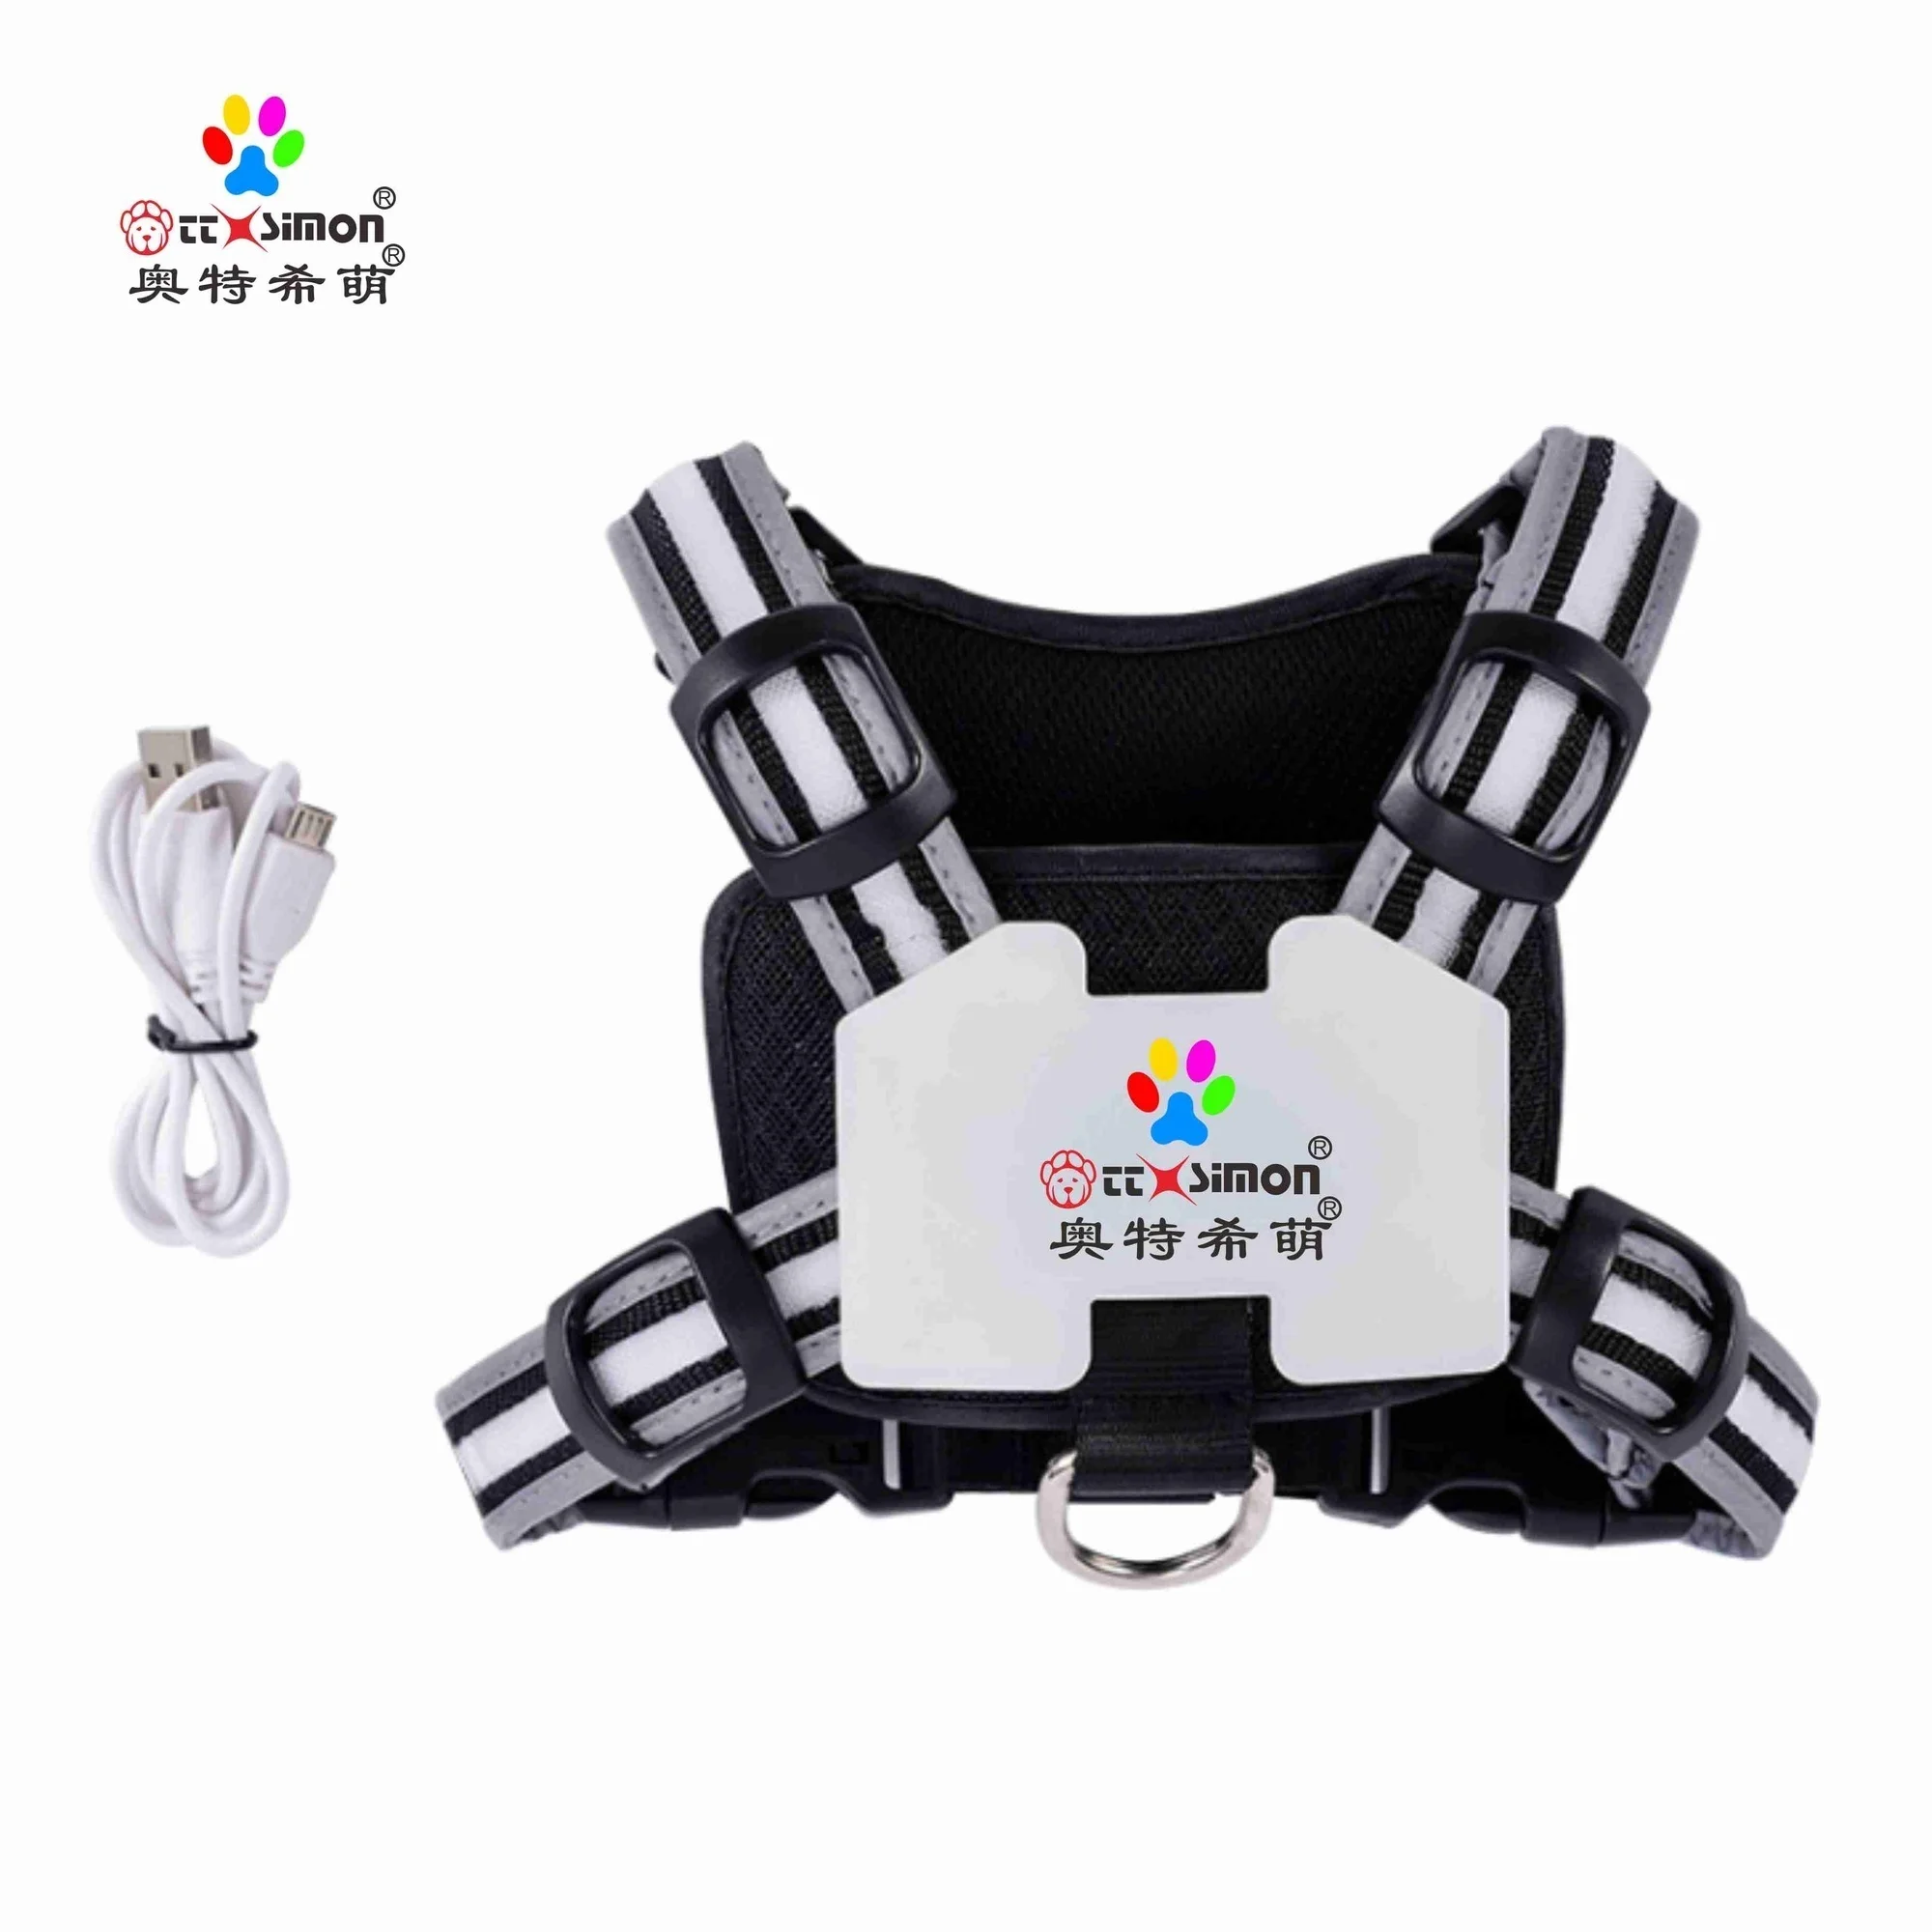 

light led dog harness fashion pet harness led rechargeable dog harness dog products innovations pet accessories